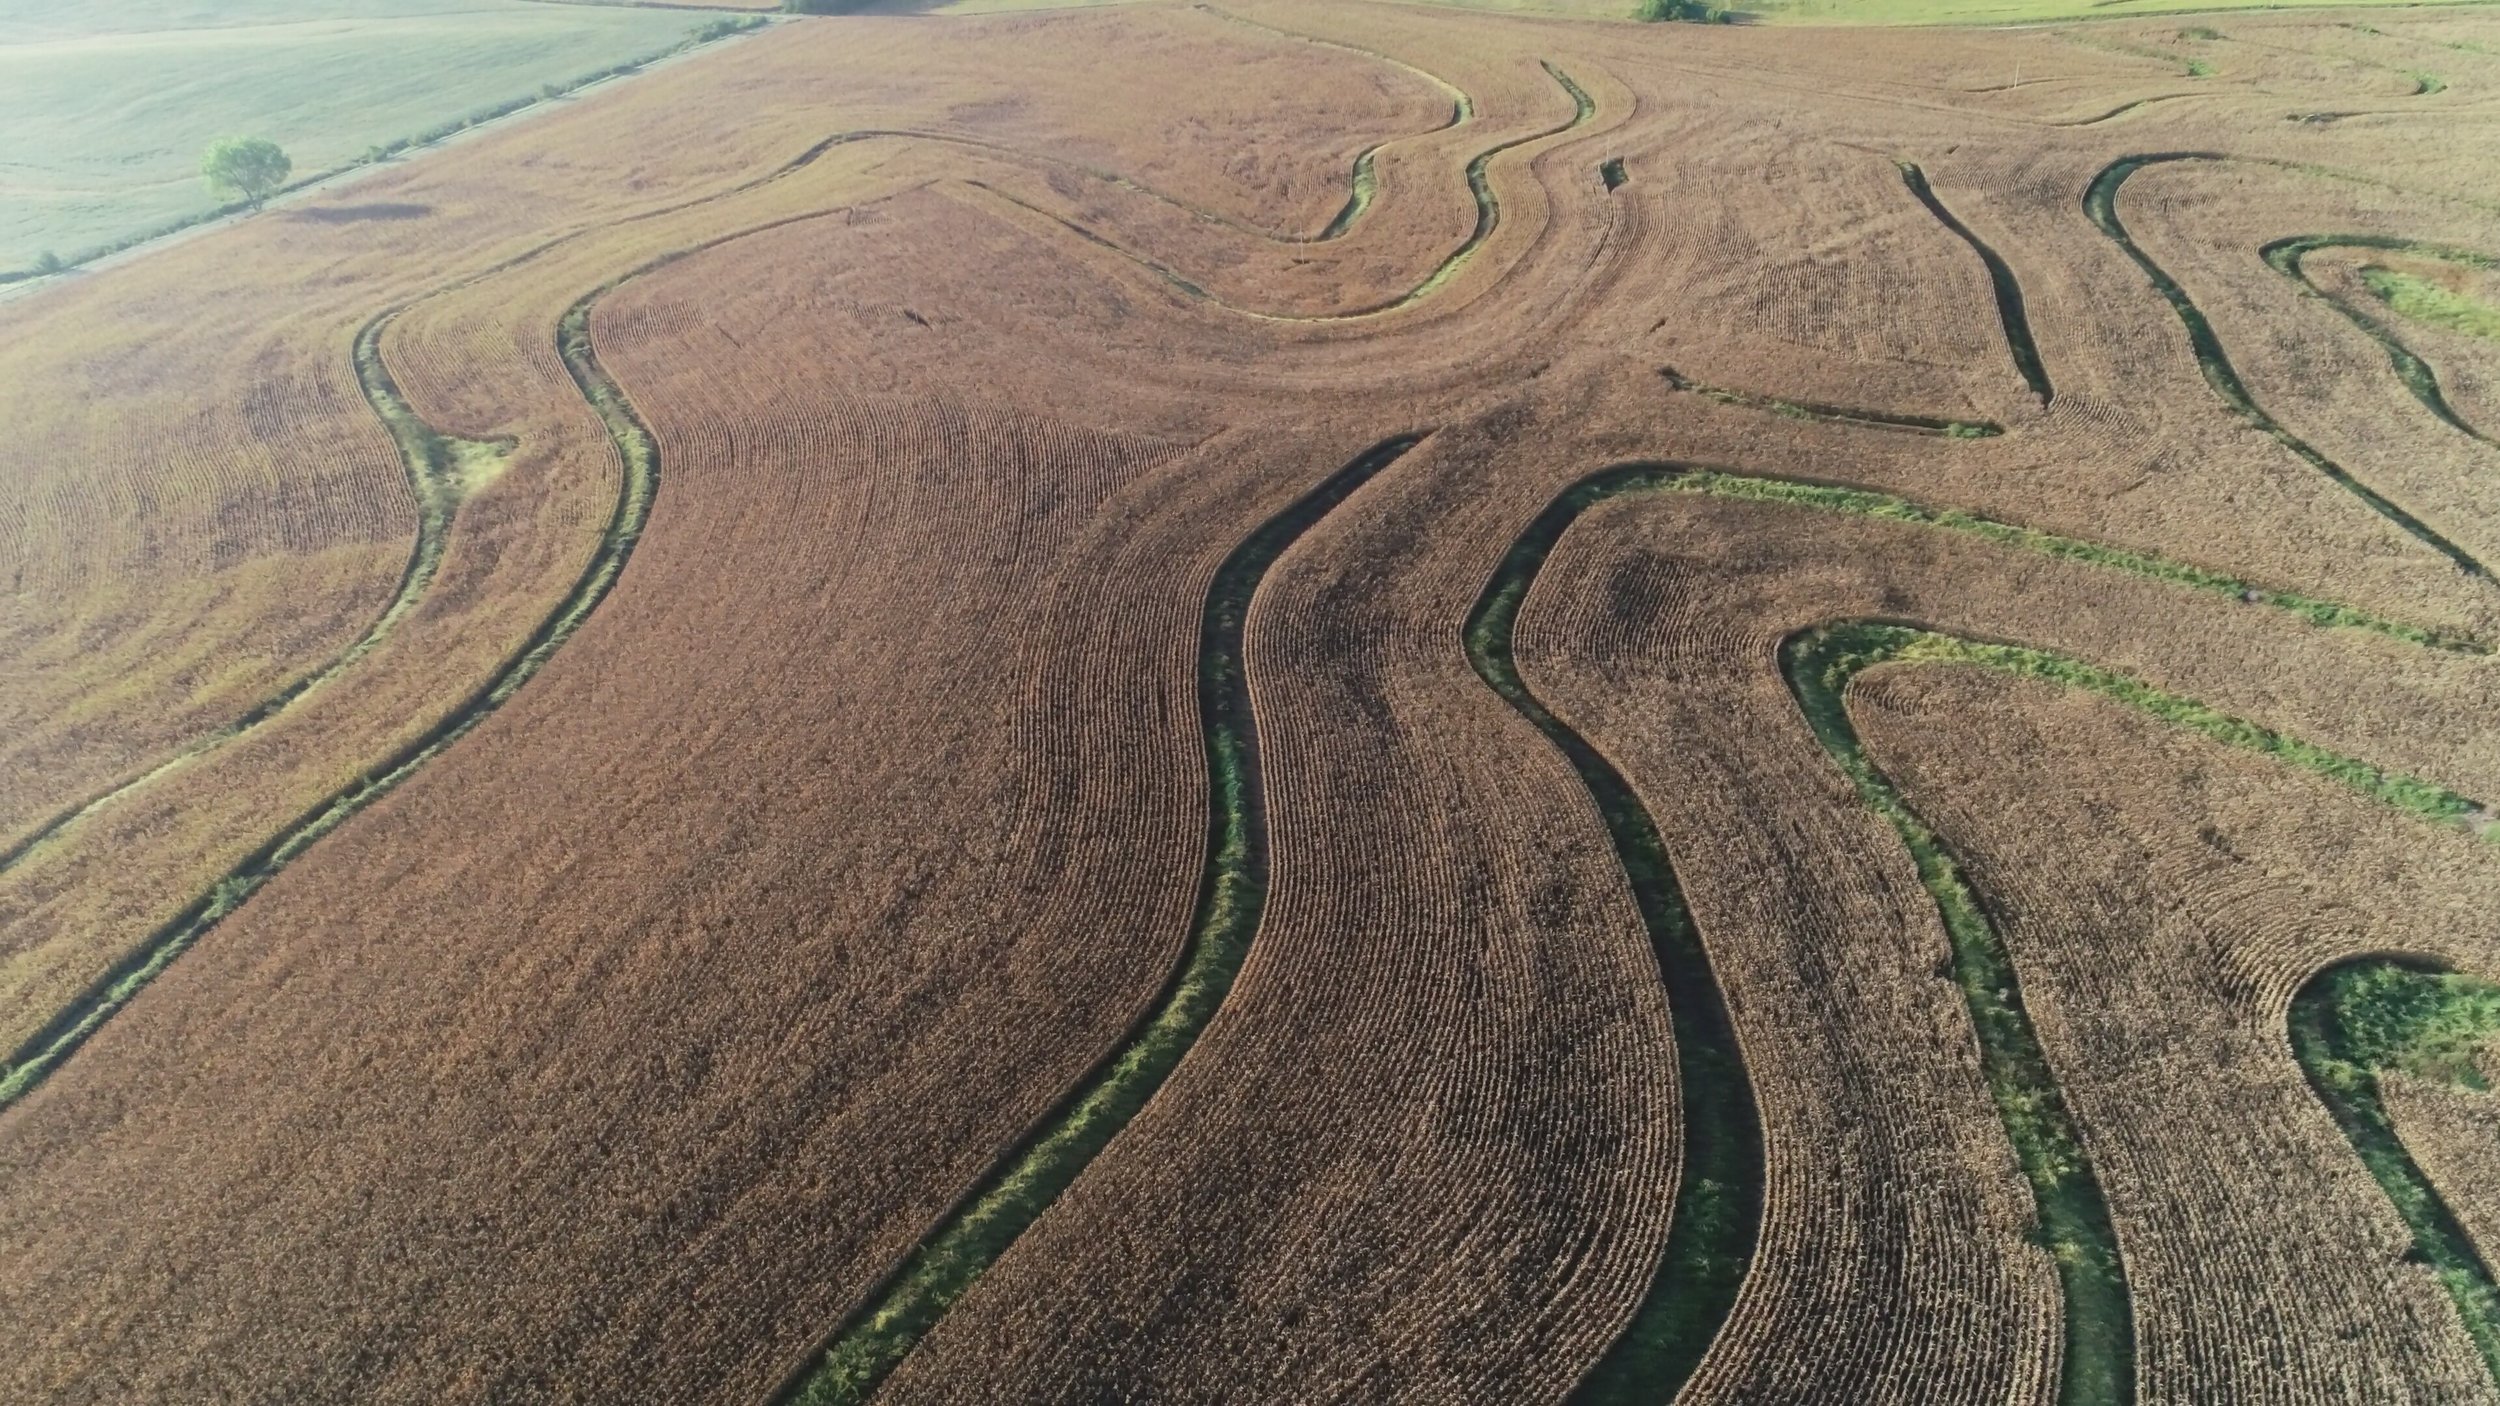 View of North County Line Tract Planted in Corn (September 15, 2018)